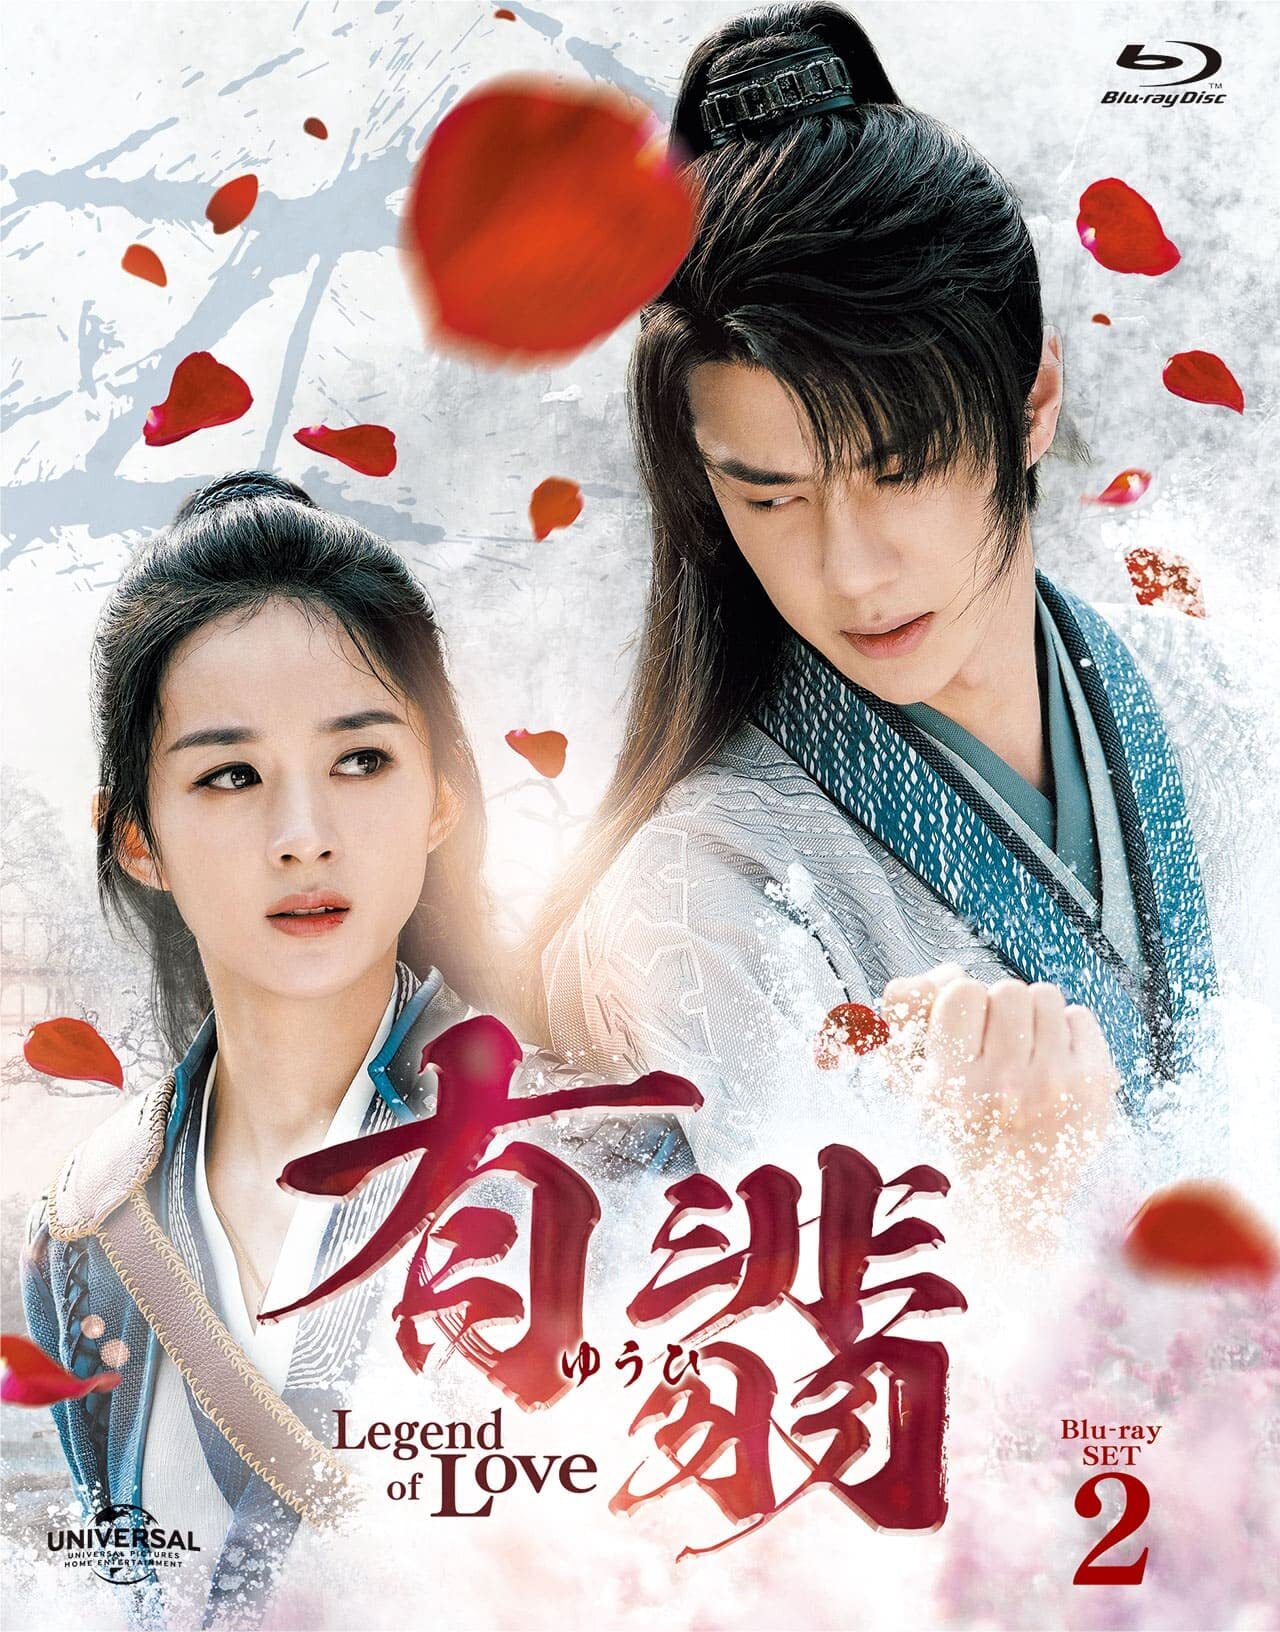 Legend of Fei Blu-ray (有翡(ゆうひ -Legend of Love- / You Fei 